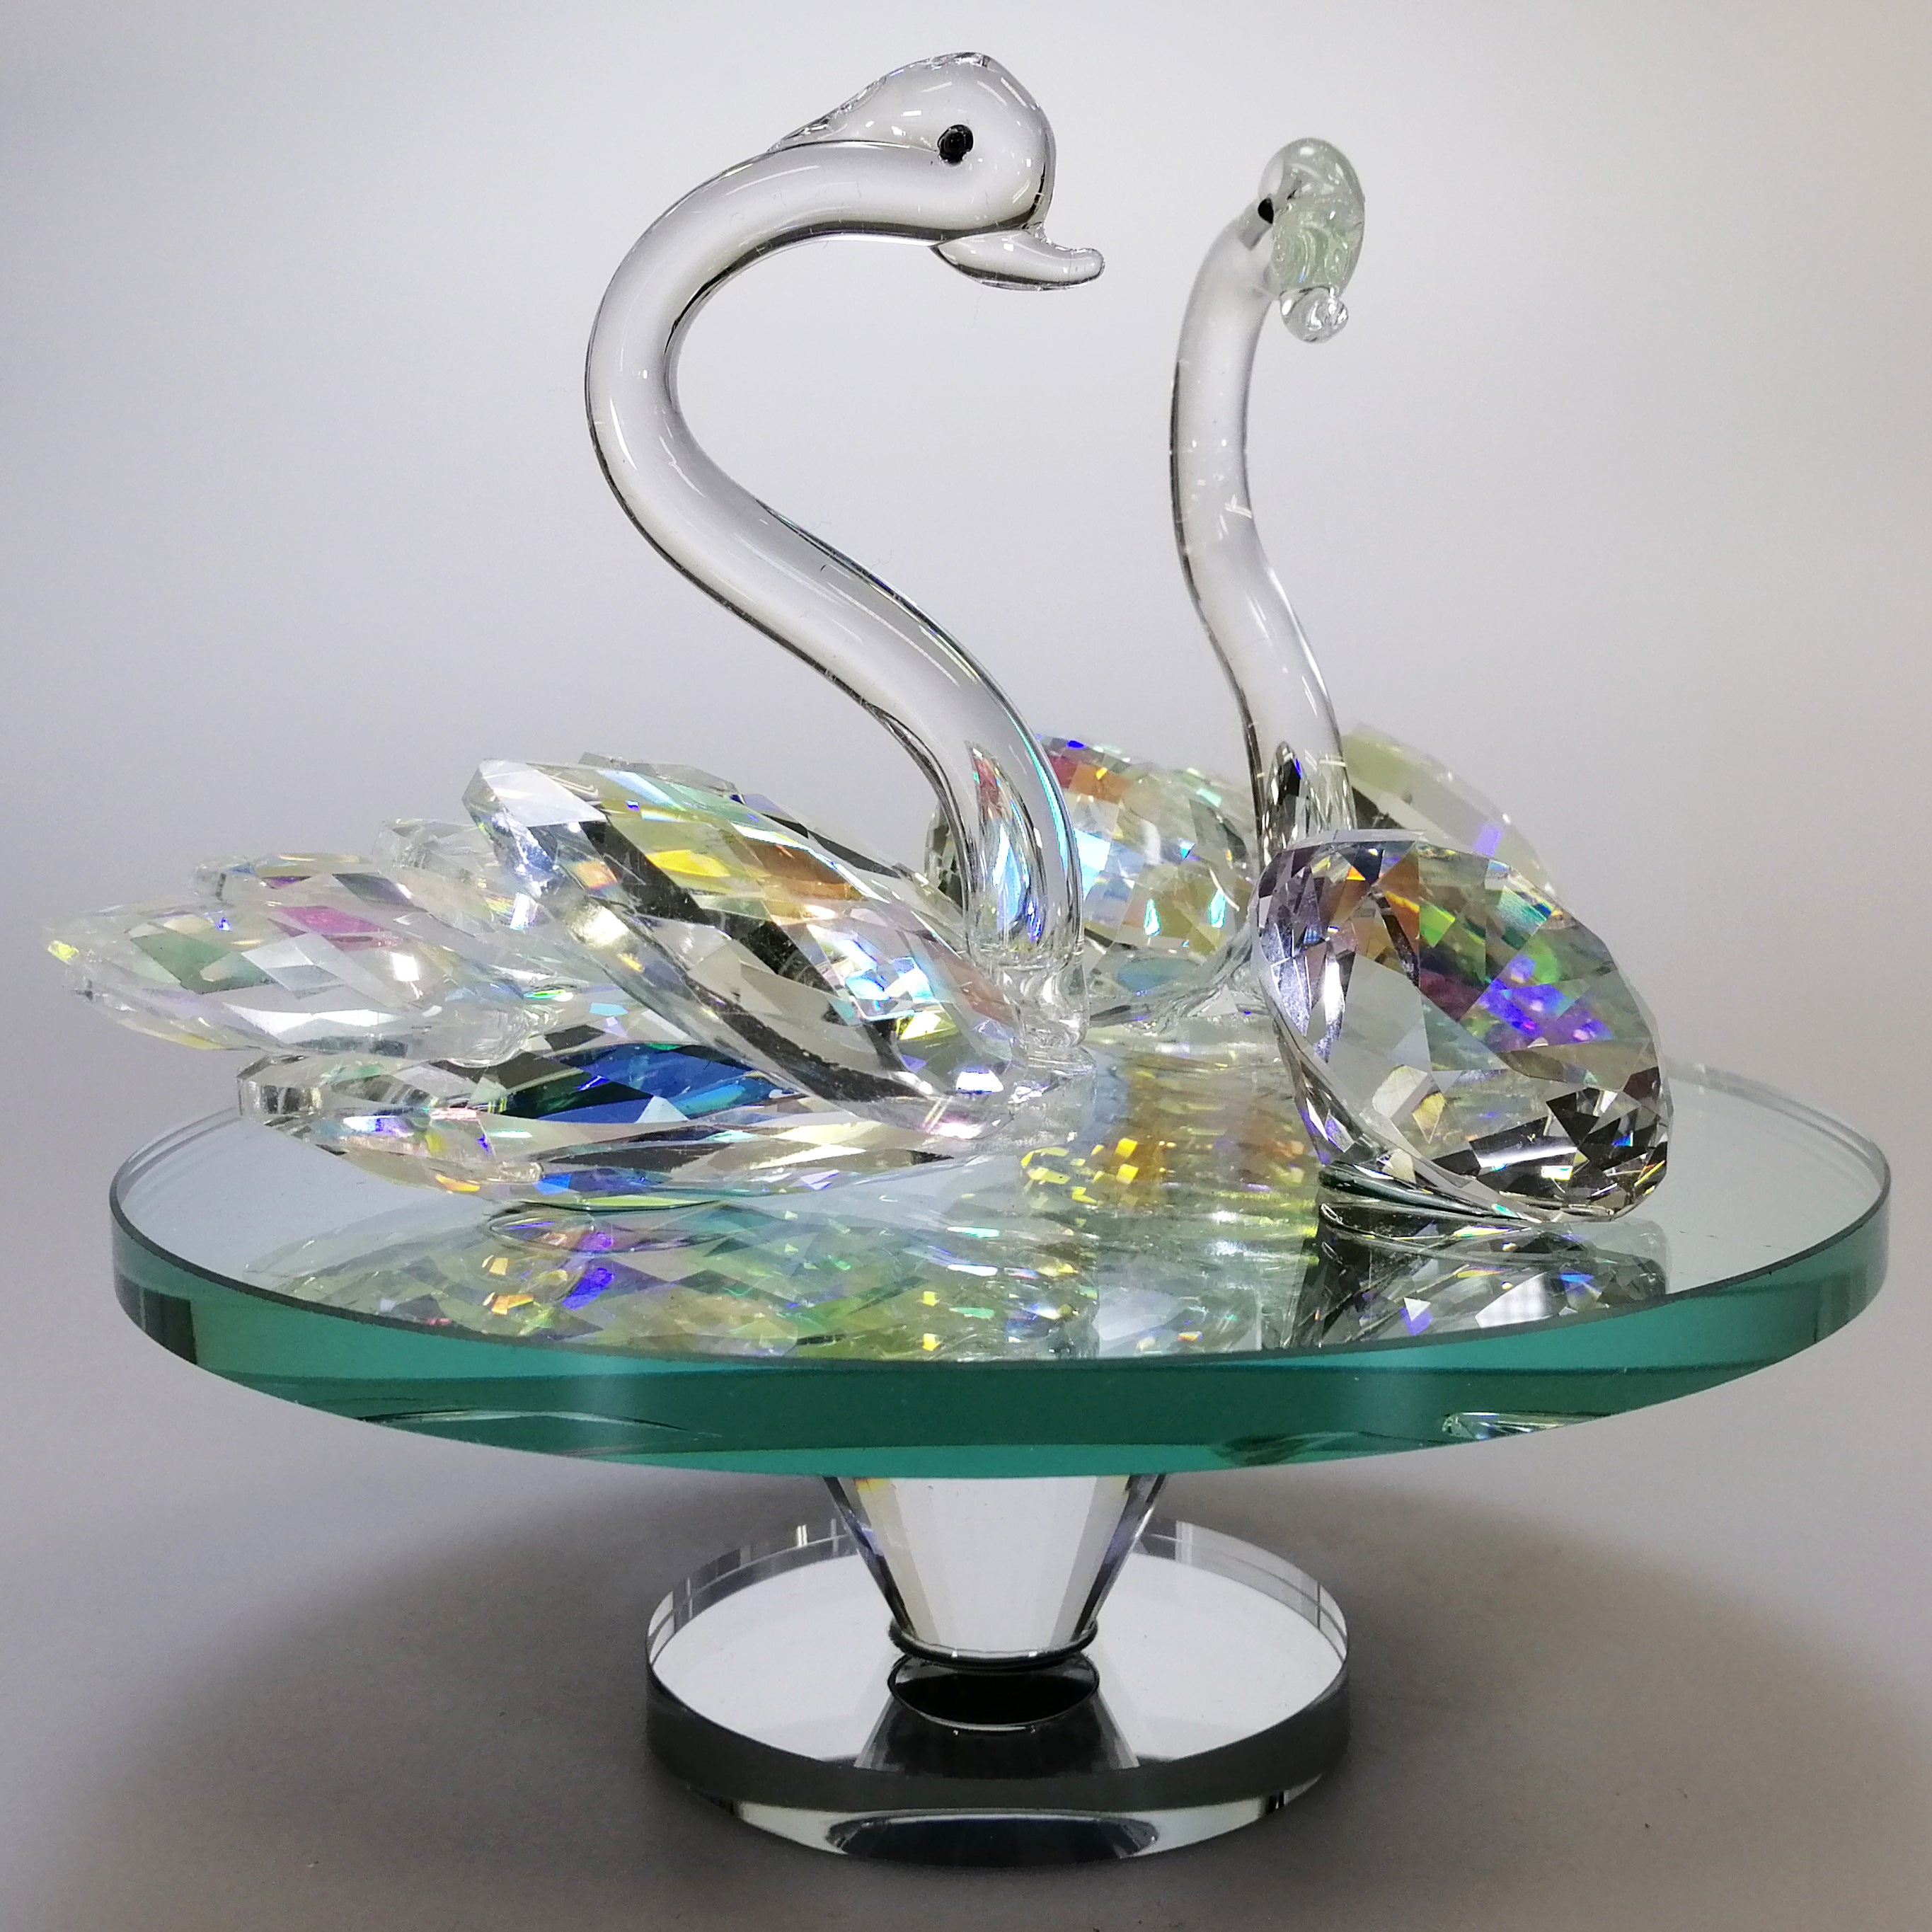 Iridescent Cut Glass Swans with Gem on Turnable Mirror Base